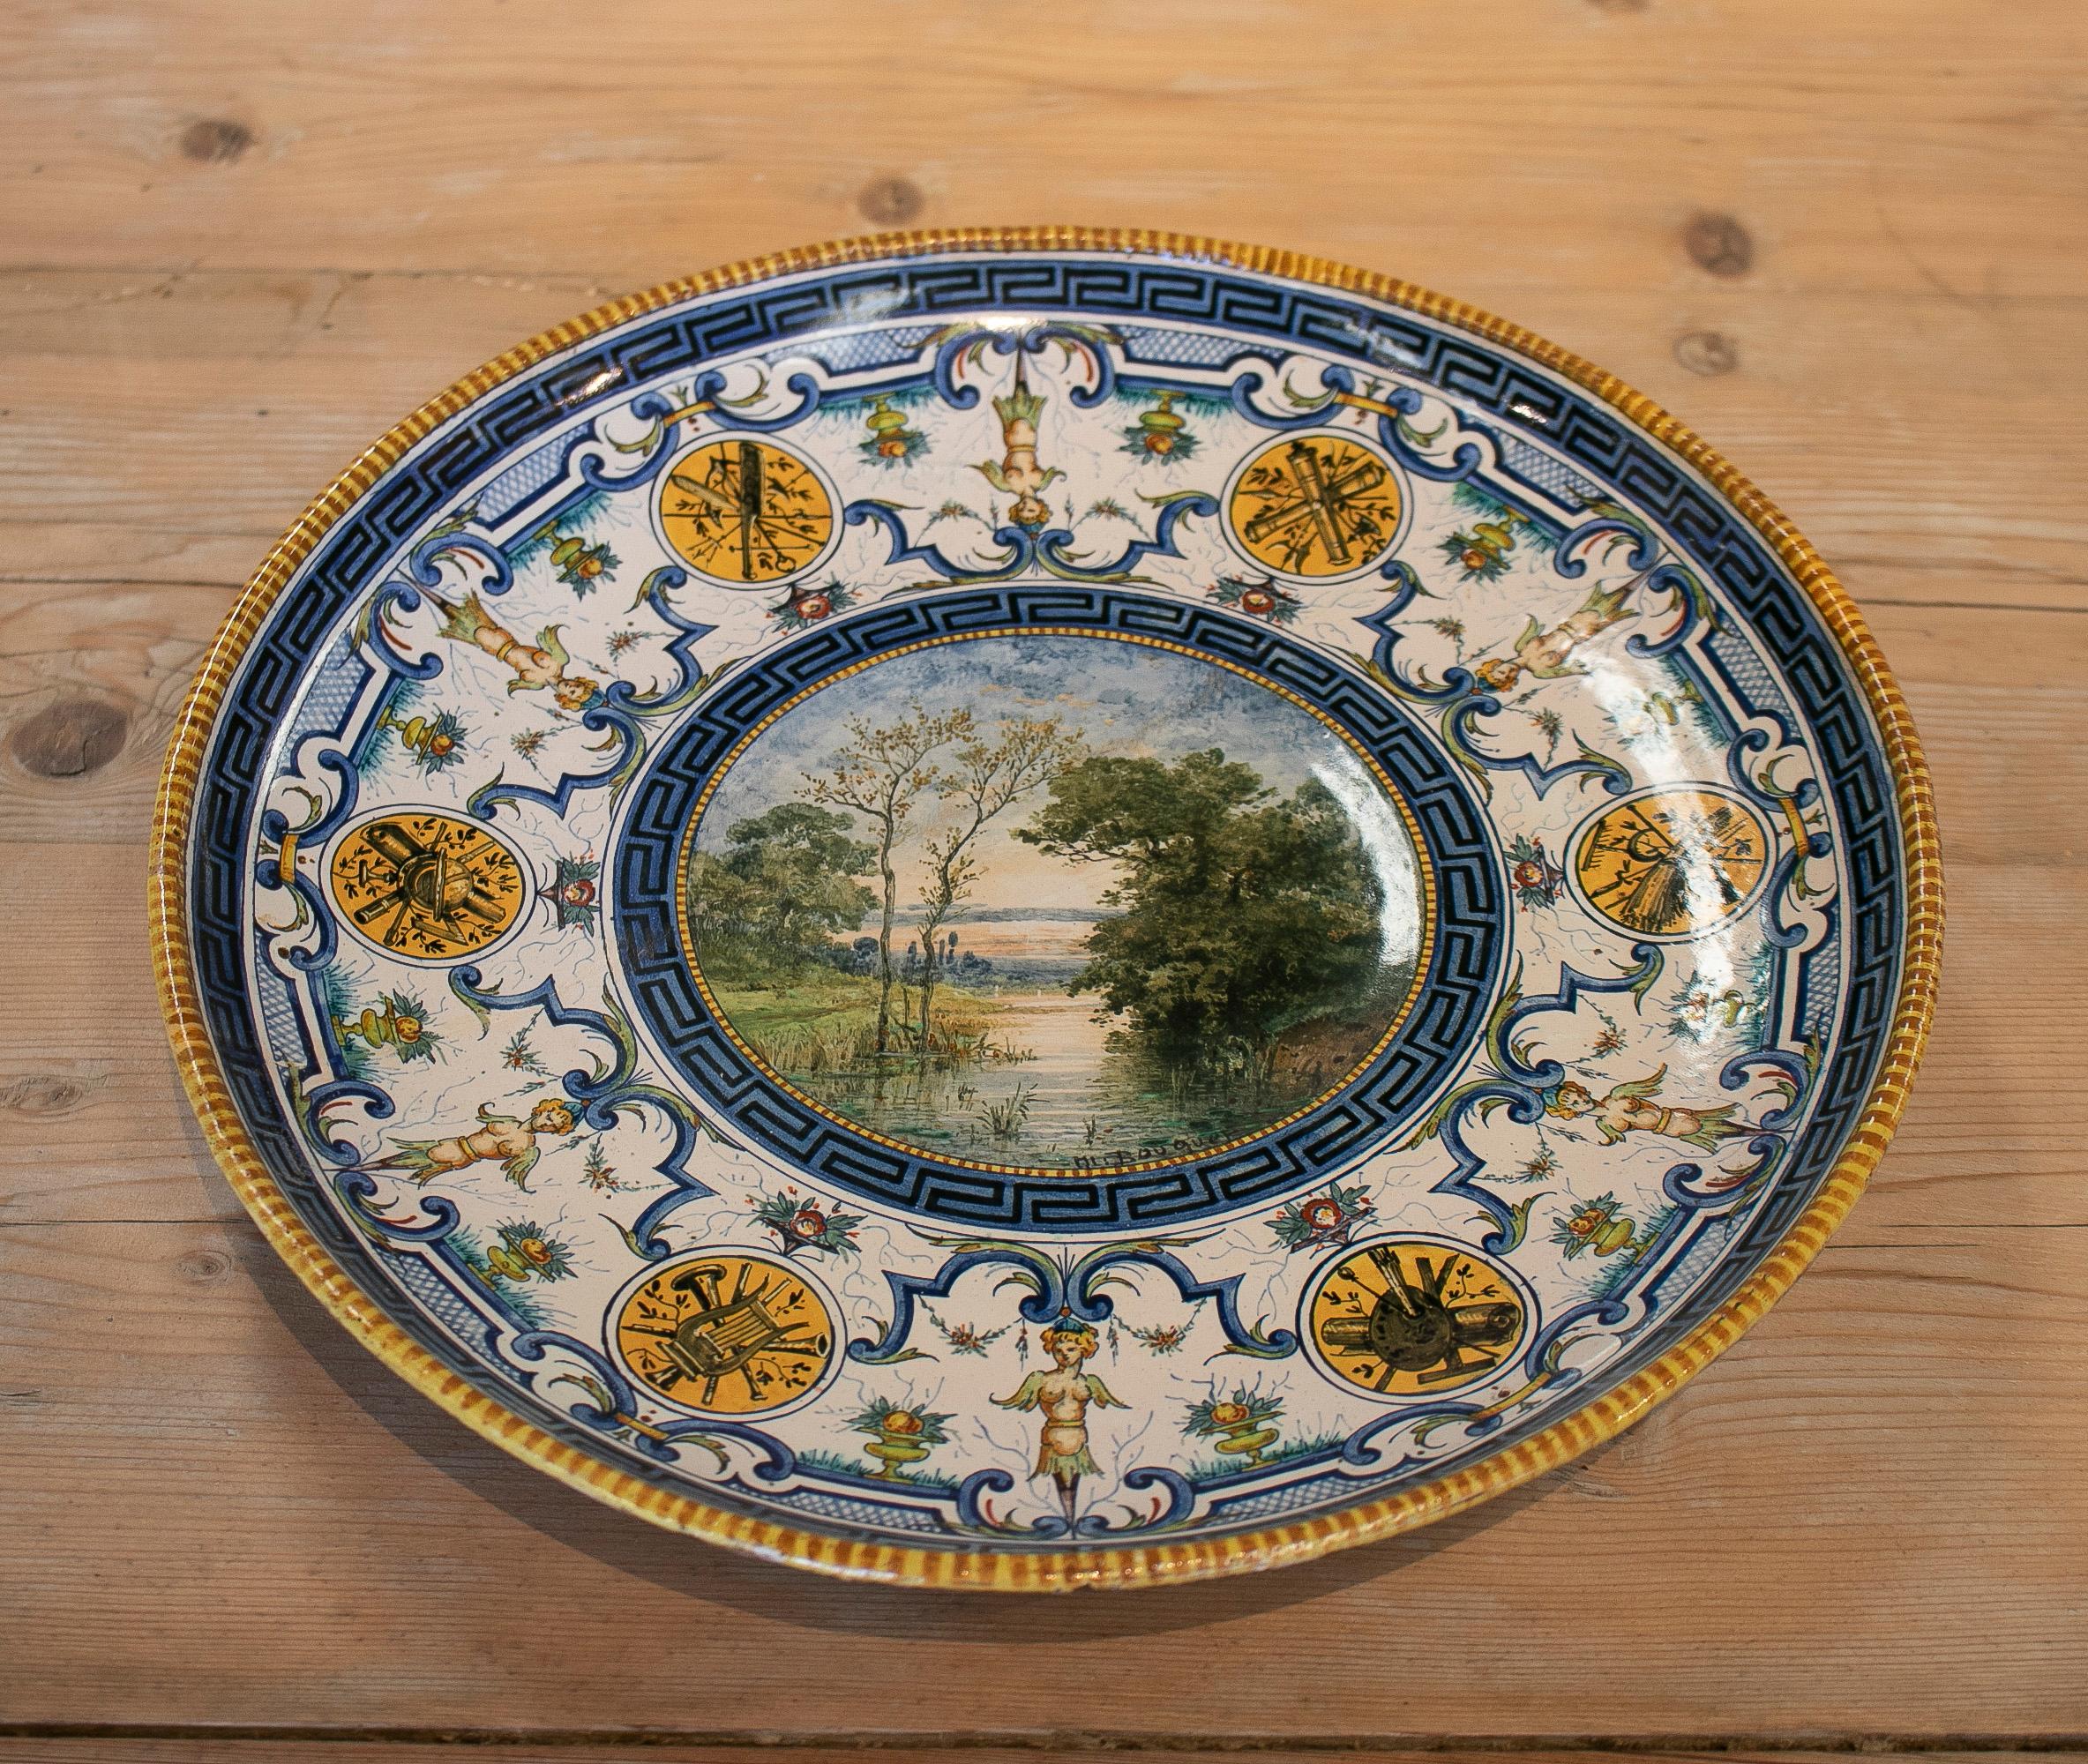 Antique late 19th century French ceramic plate with Claude Charles Rudhart landscape scene.